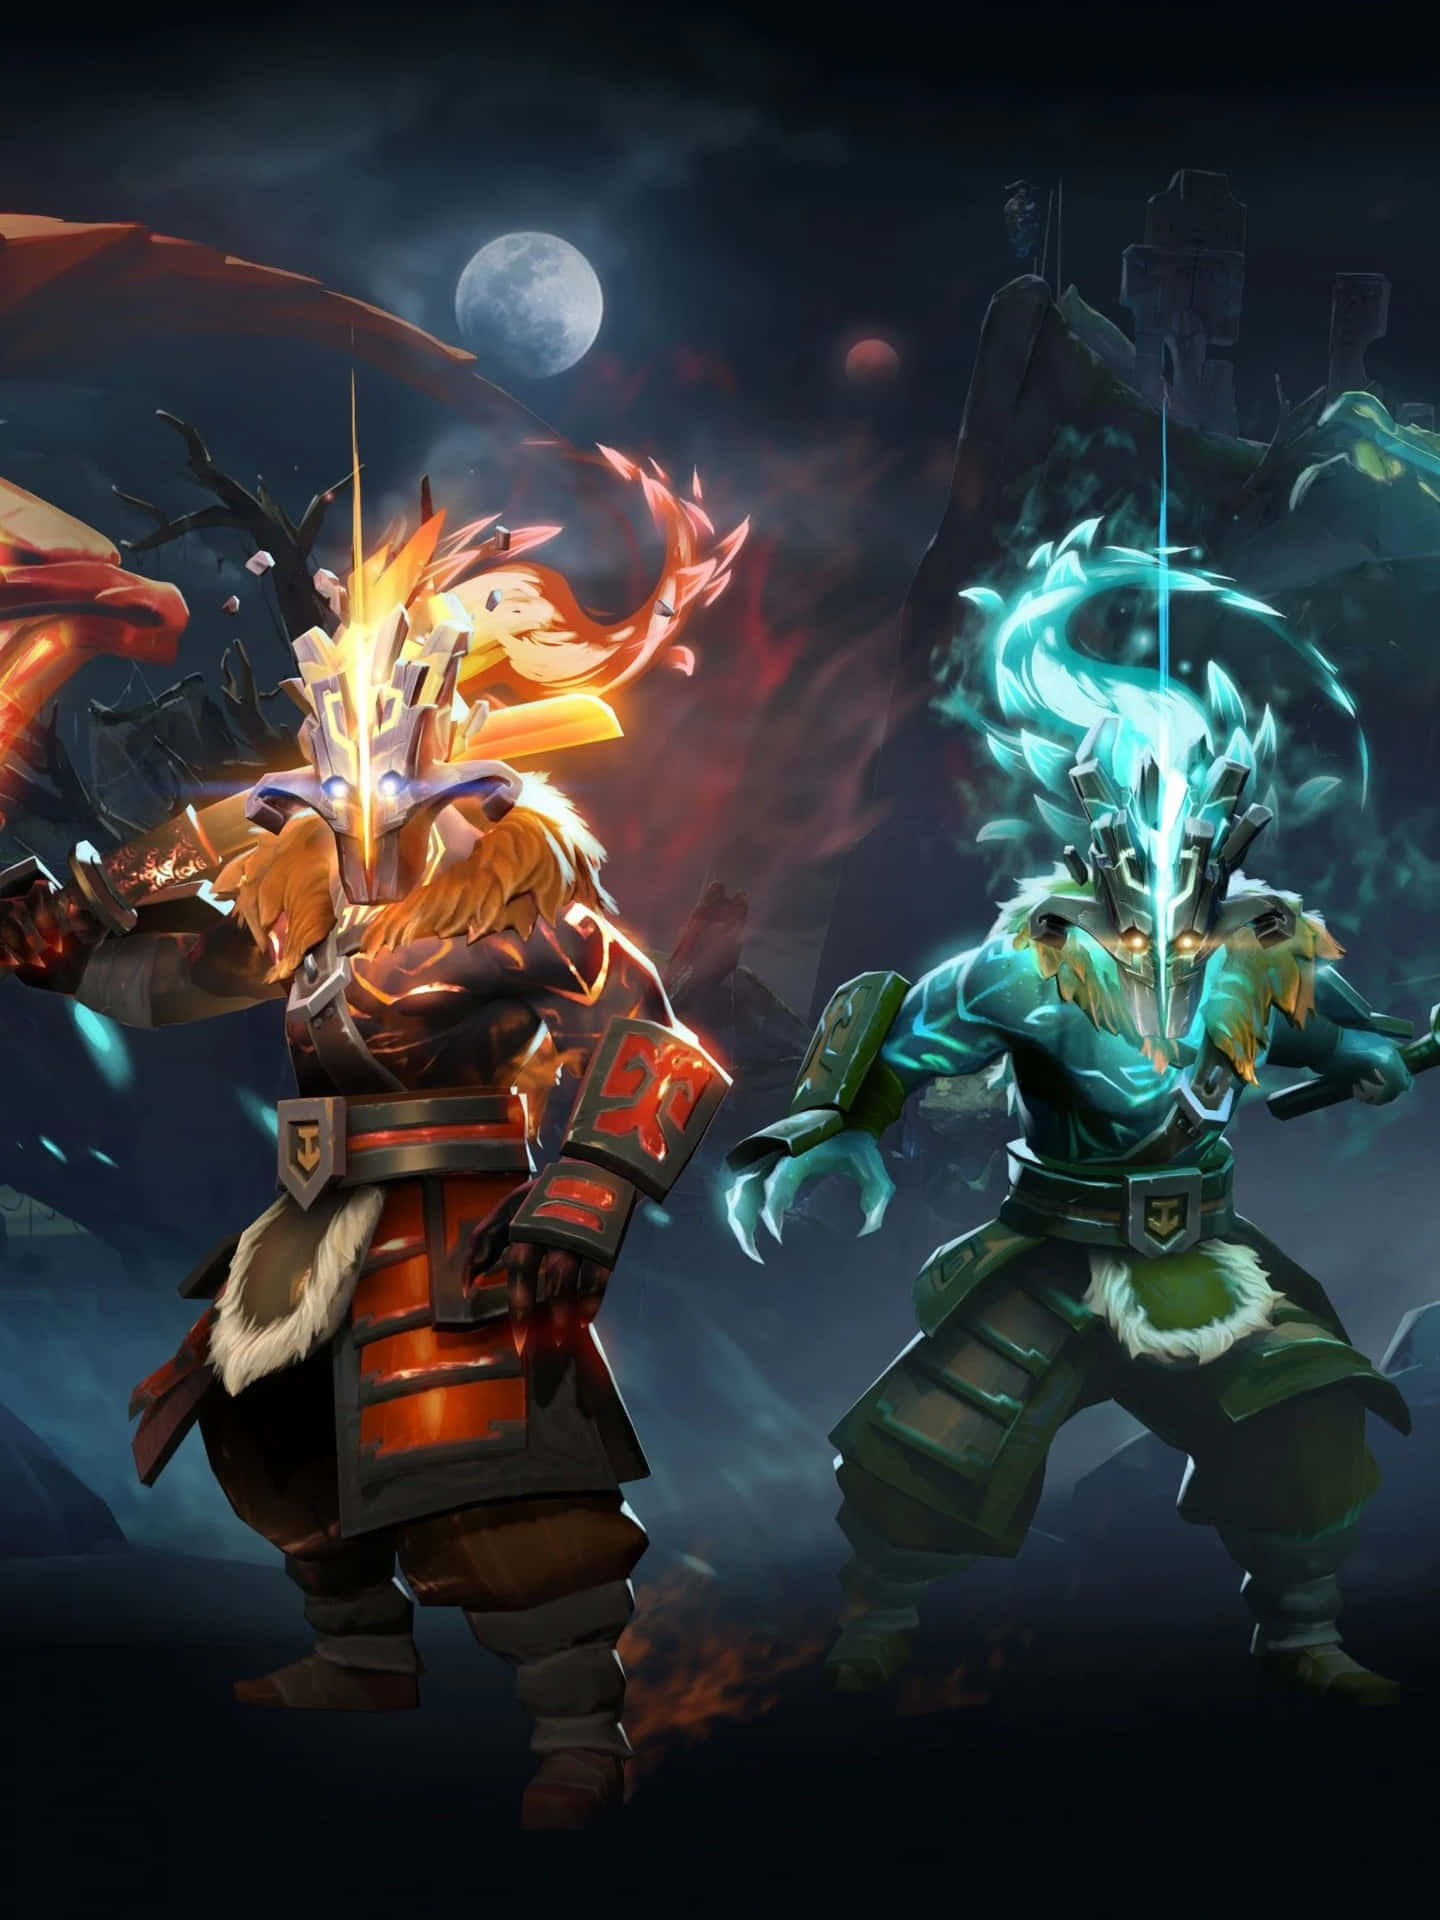 Be One Step Ahead! Play Dota 2 On Your Phone.